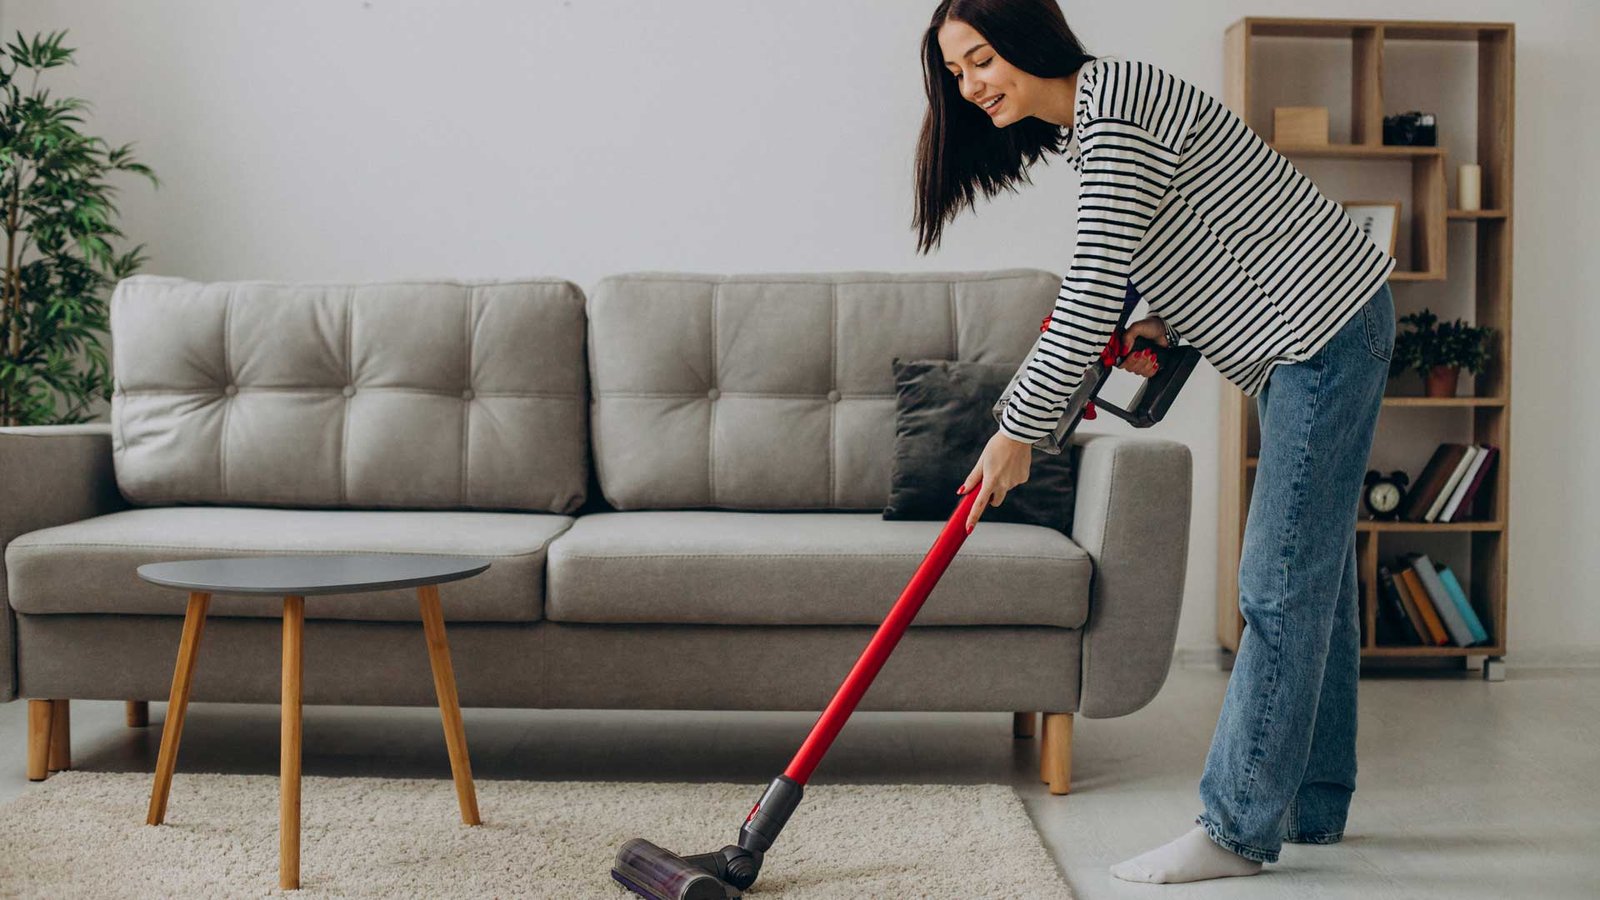 5 Tips for Finding the Right House Cleaning Service